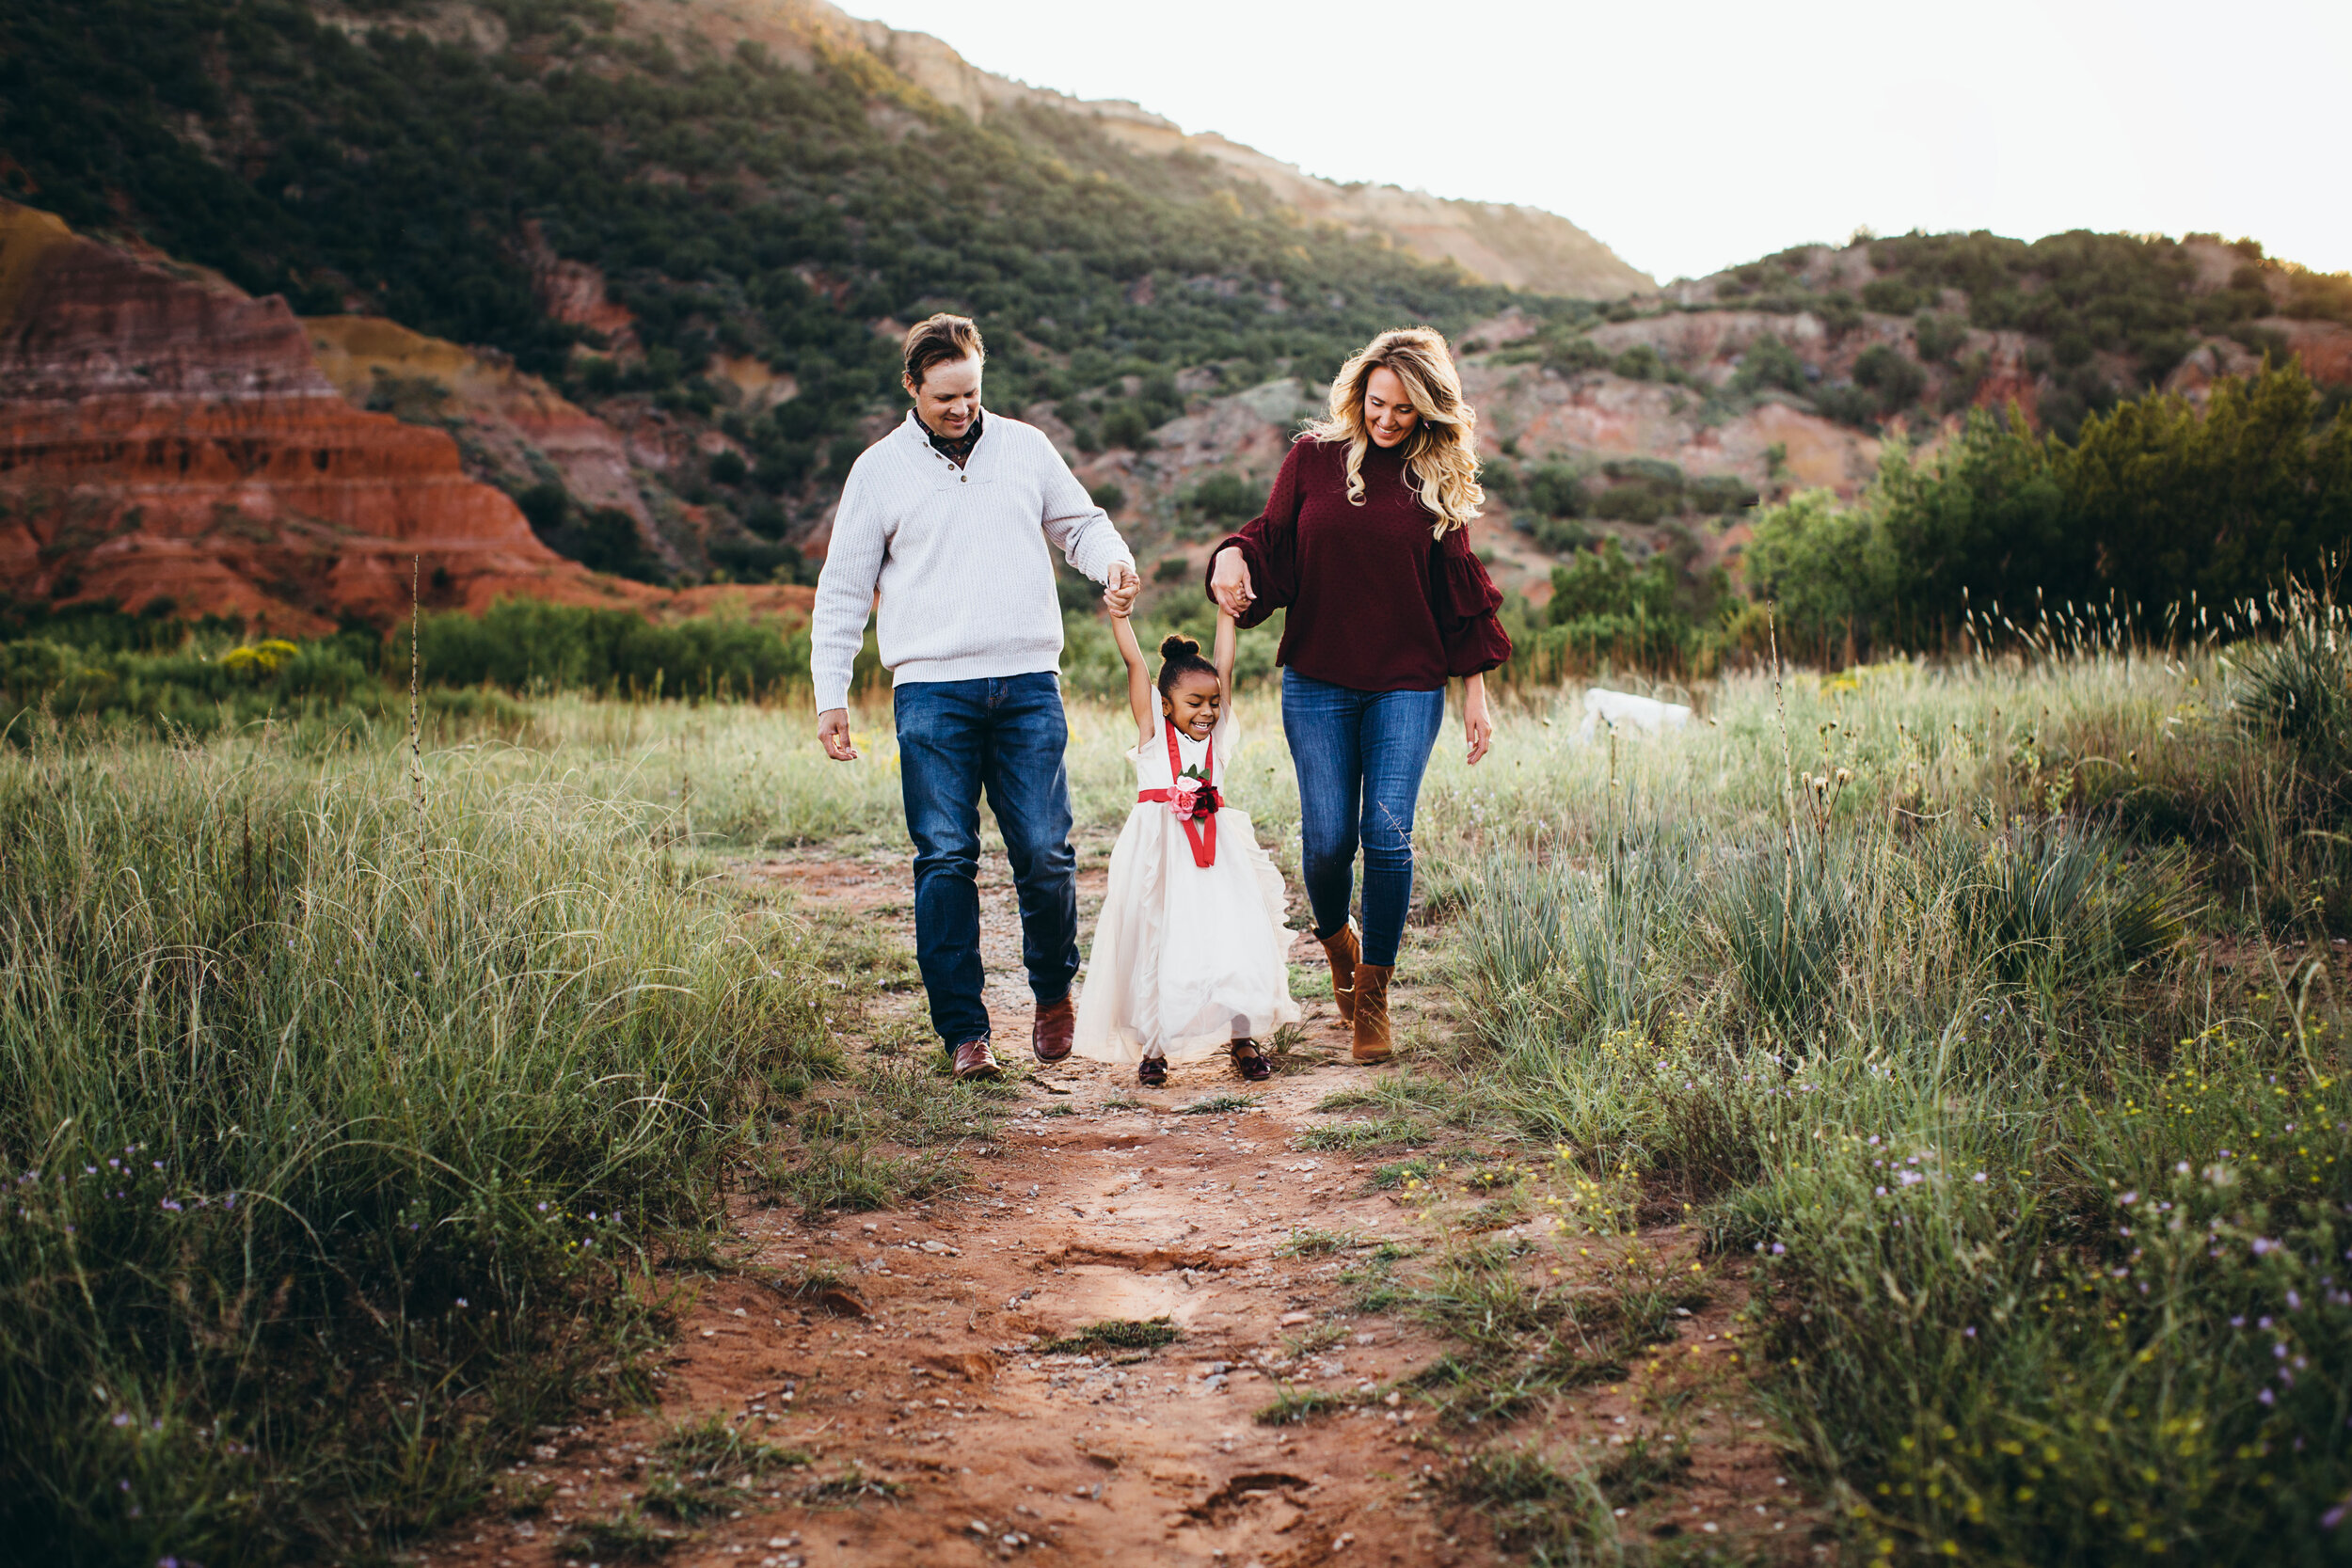  The colors of their outfits and the colors in Palo Duro Canyon went together so flawlessly #tealawardphotography #texasfamilyphotographer #amarillophotographer #amarillofamilyphotographer #lifestylephotography #fallphotos #familyphotoshoot #family #lovingsiblings #families #familyphotos #naturalfamilyinteraction 